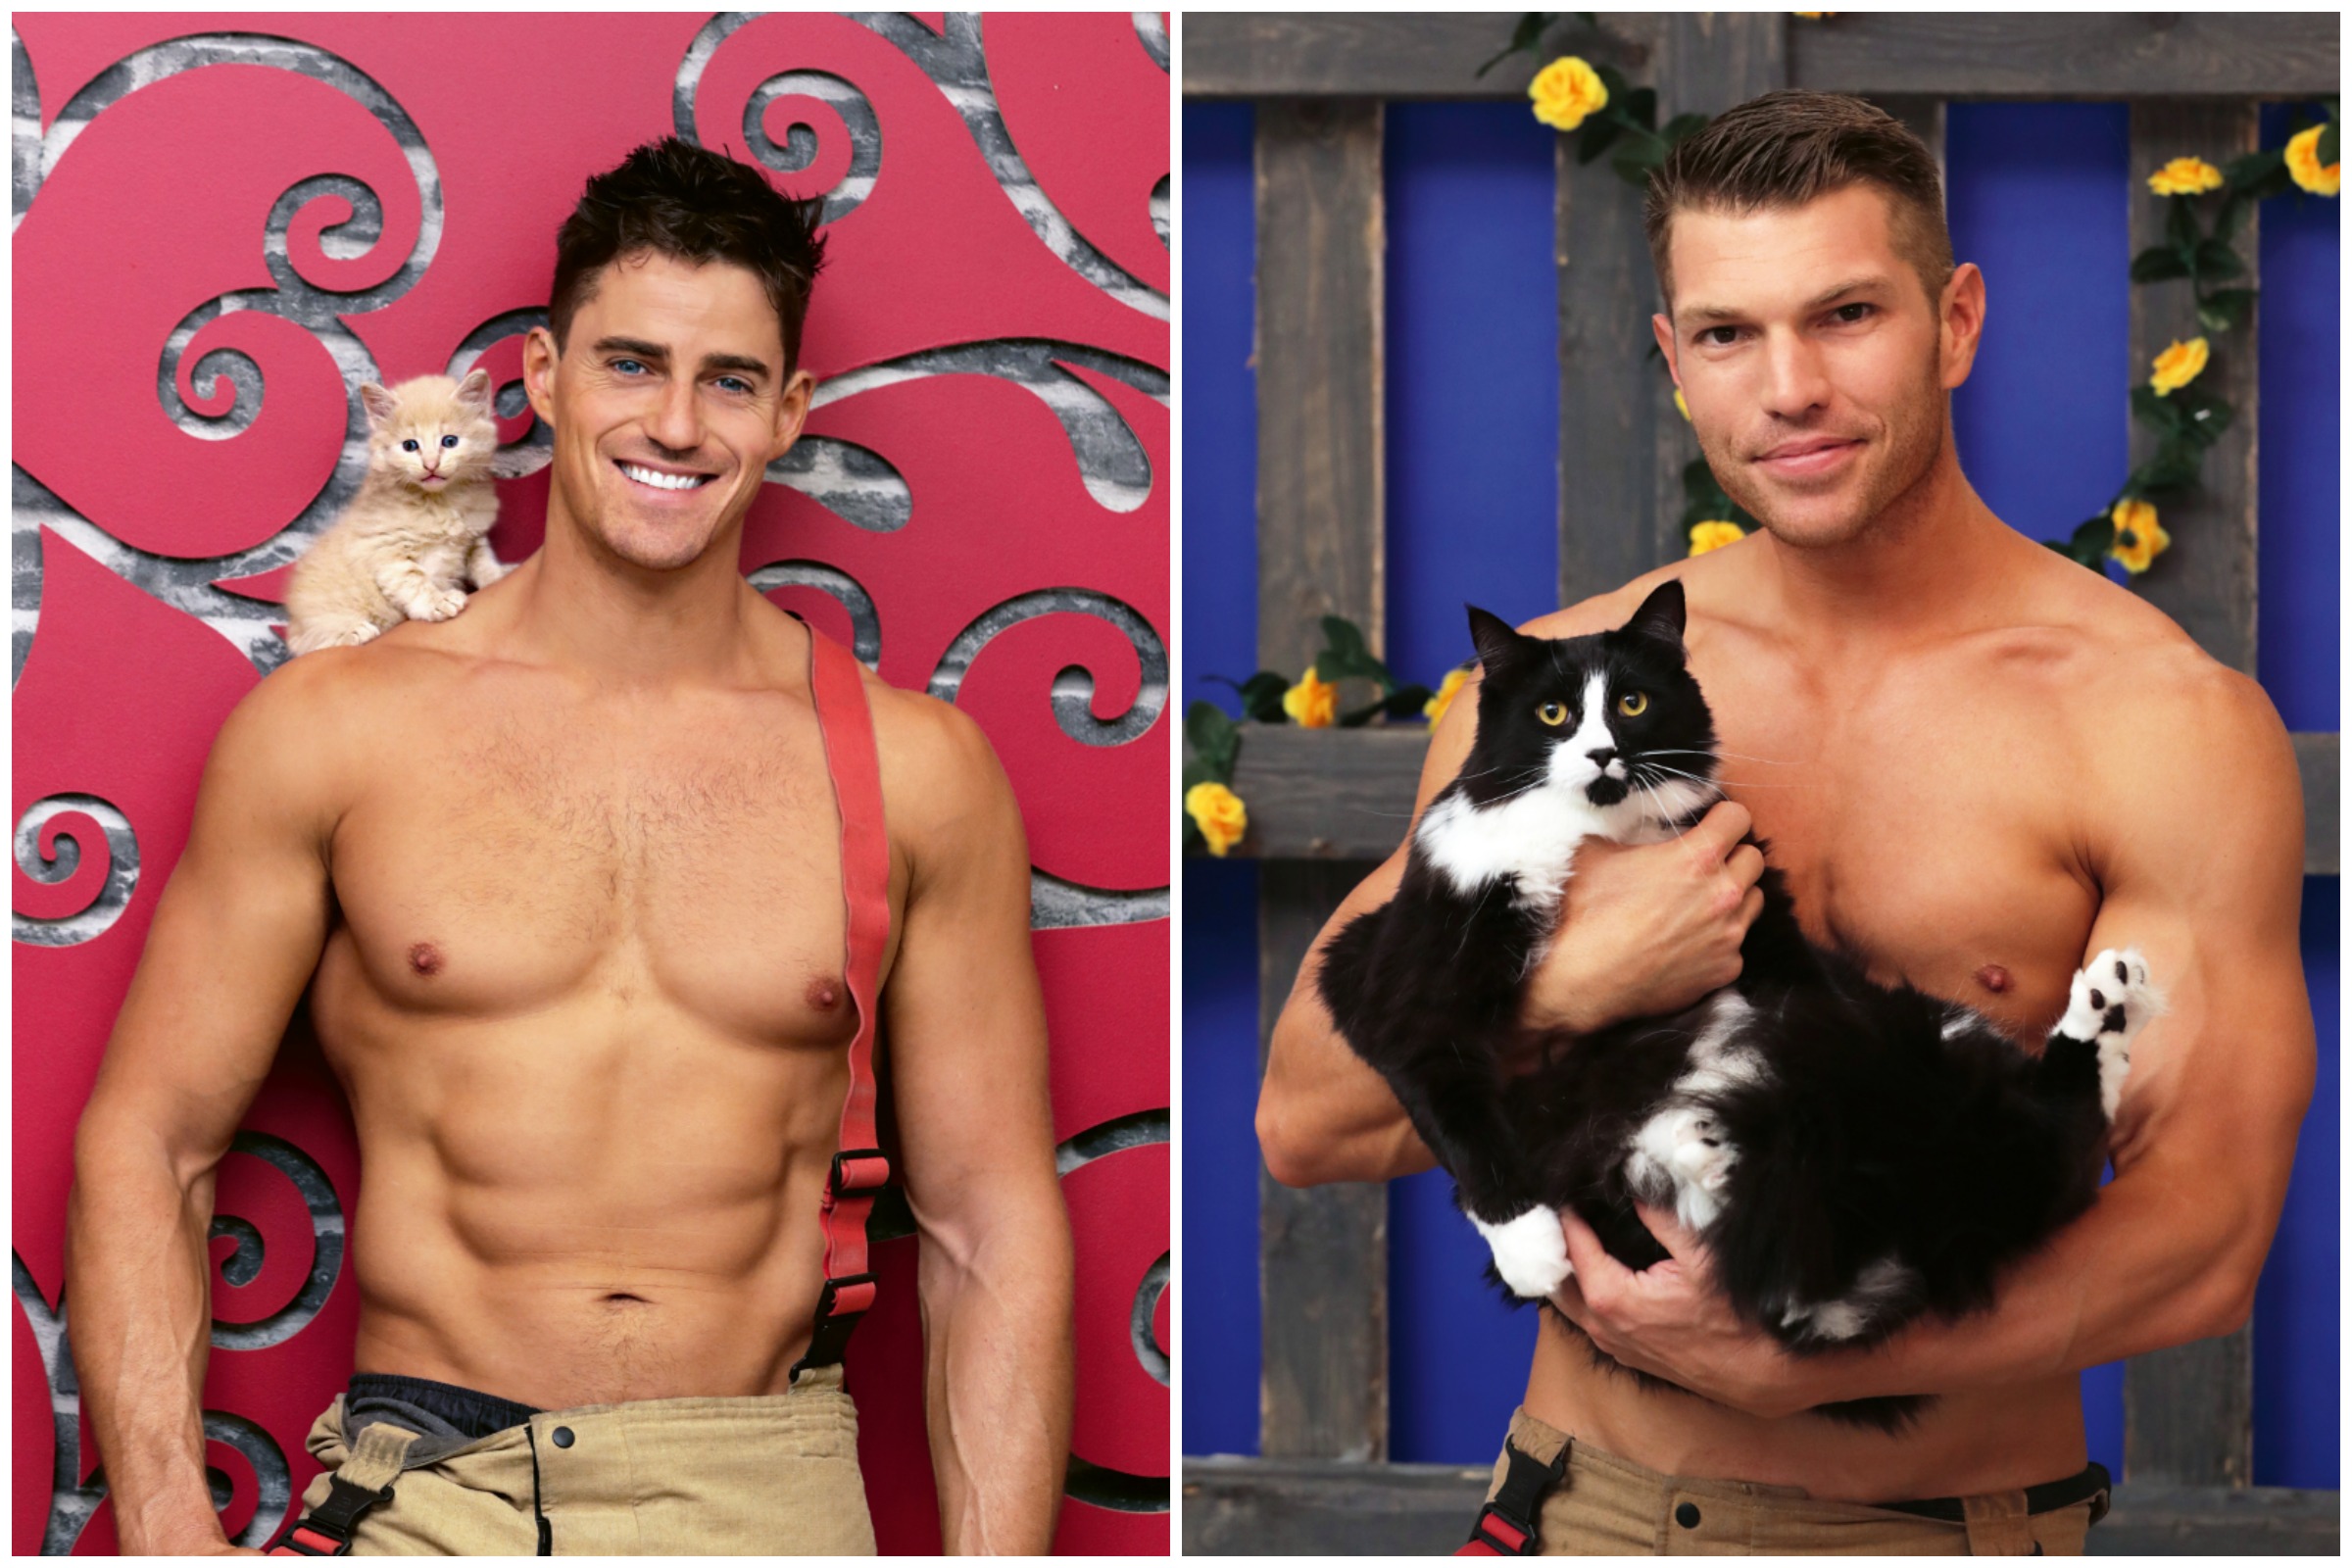 firefighters-pose-topless-with-cats-in-scorching-hot-2022-calendar